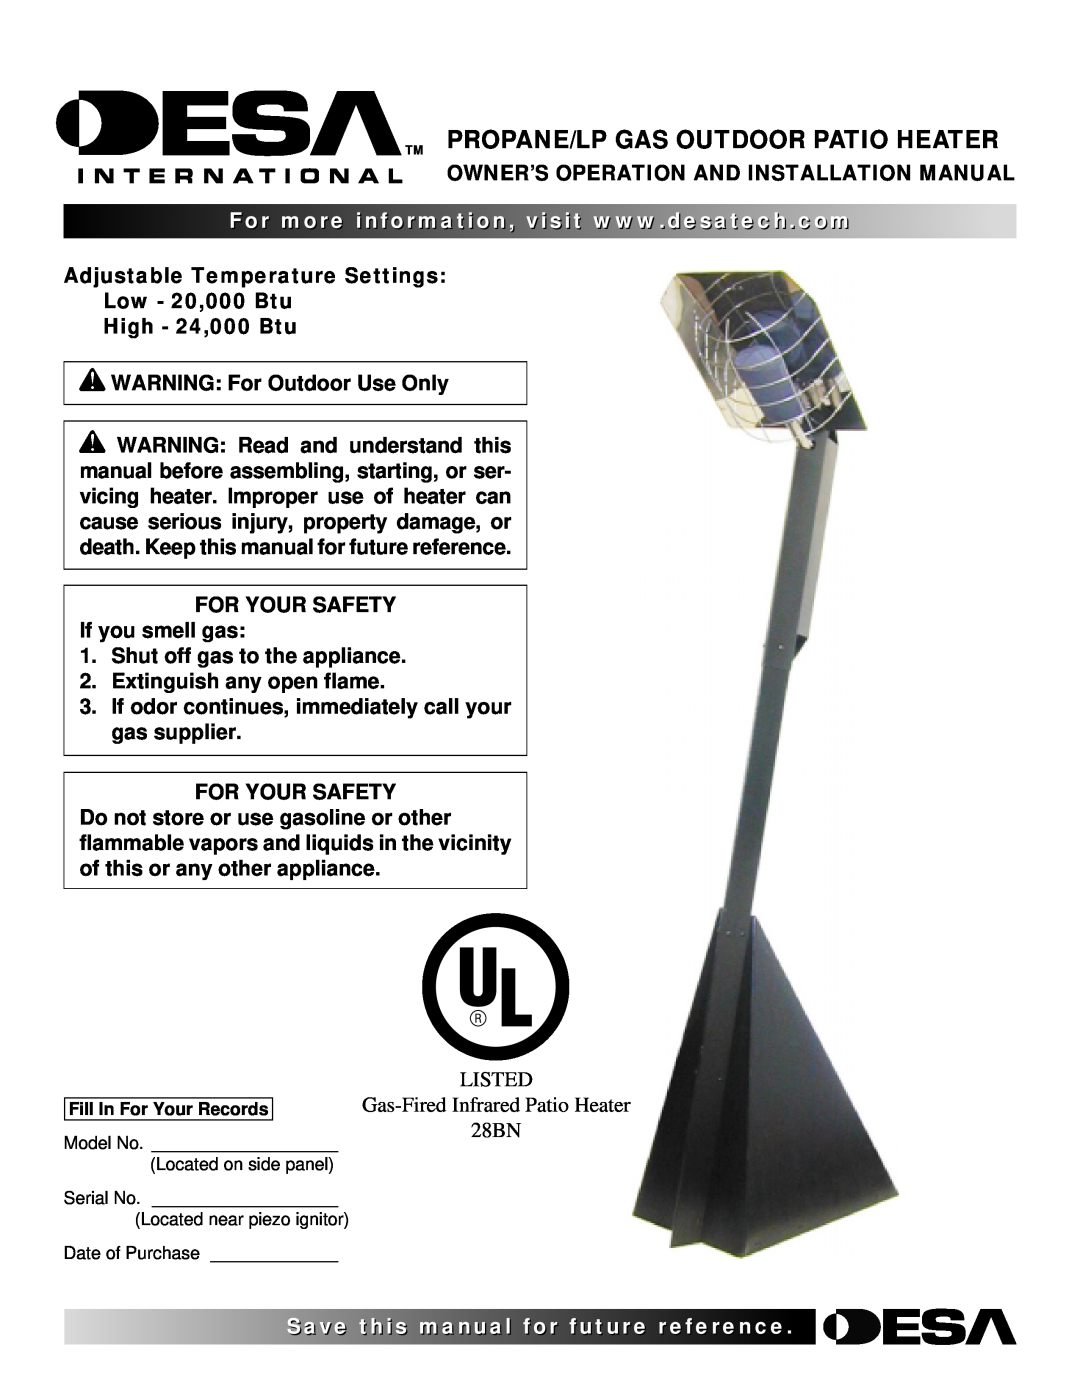 Desa 28BN installation manual Owner’S Operation And Installation Manual, visit, Propane/Lp Gas Outdoor Patio Heater 